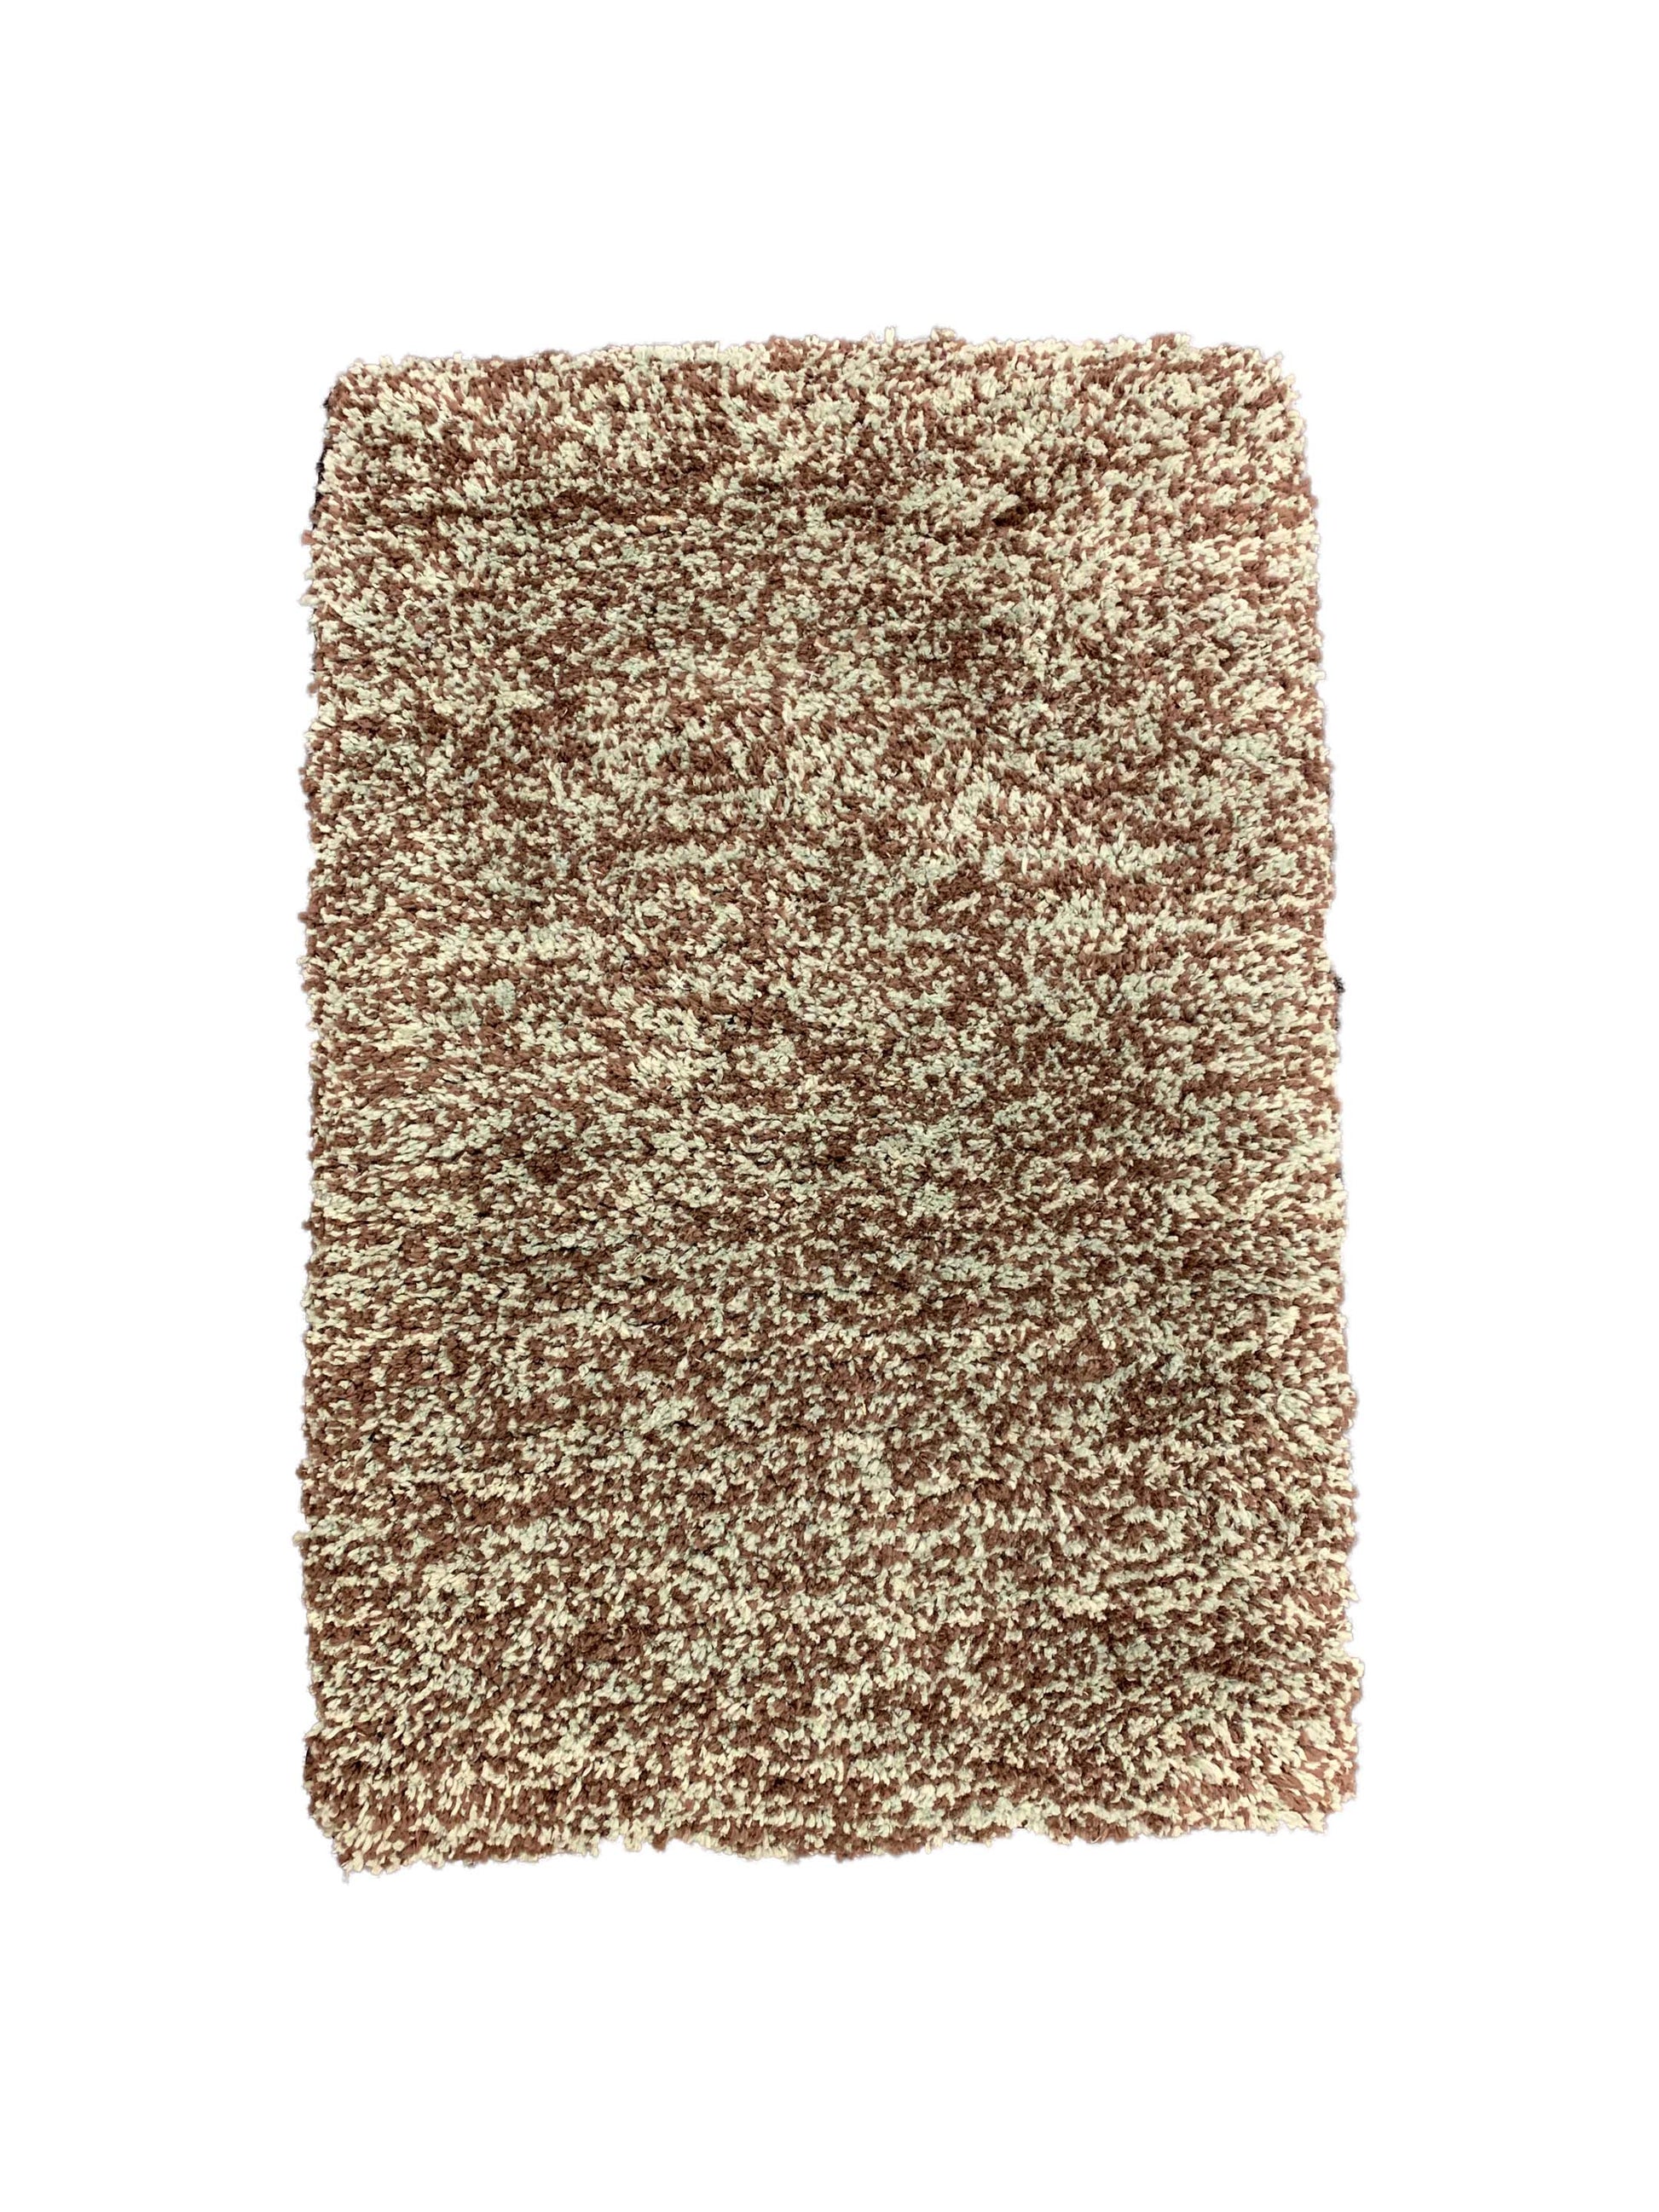 Artisan Cate Cloud100 Chocolate Transitional Knotted Rug